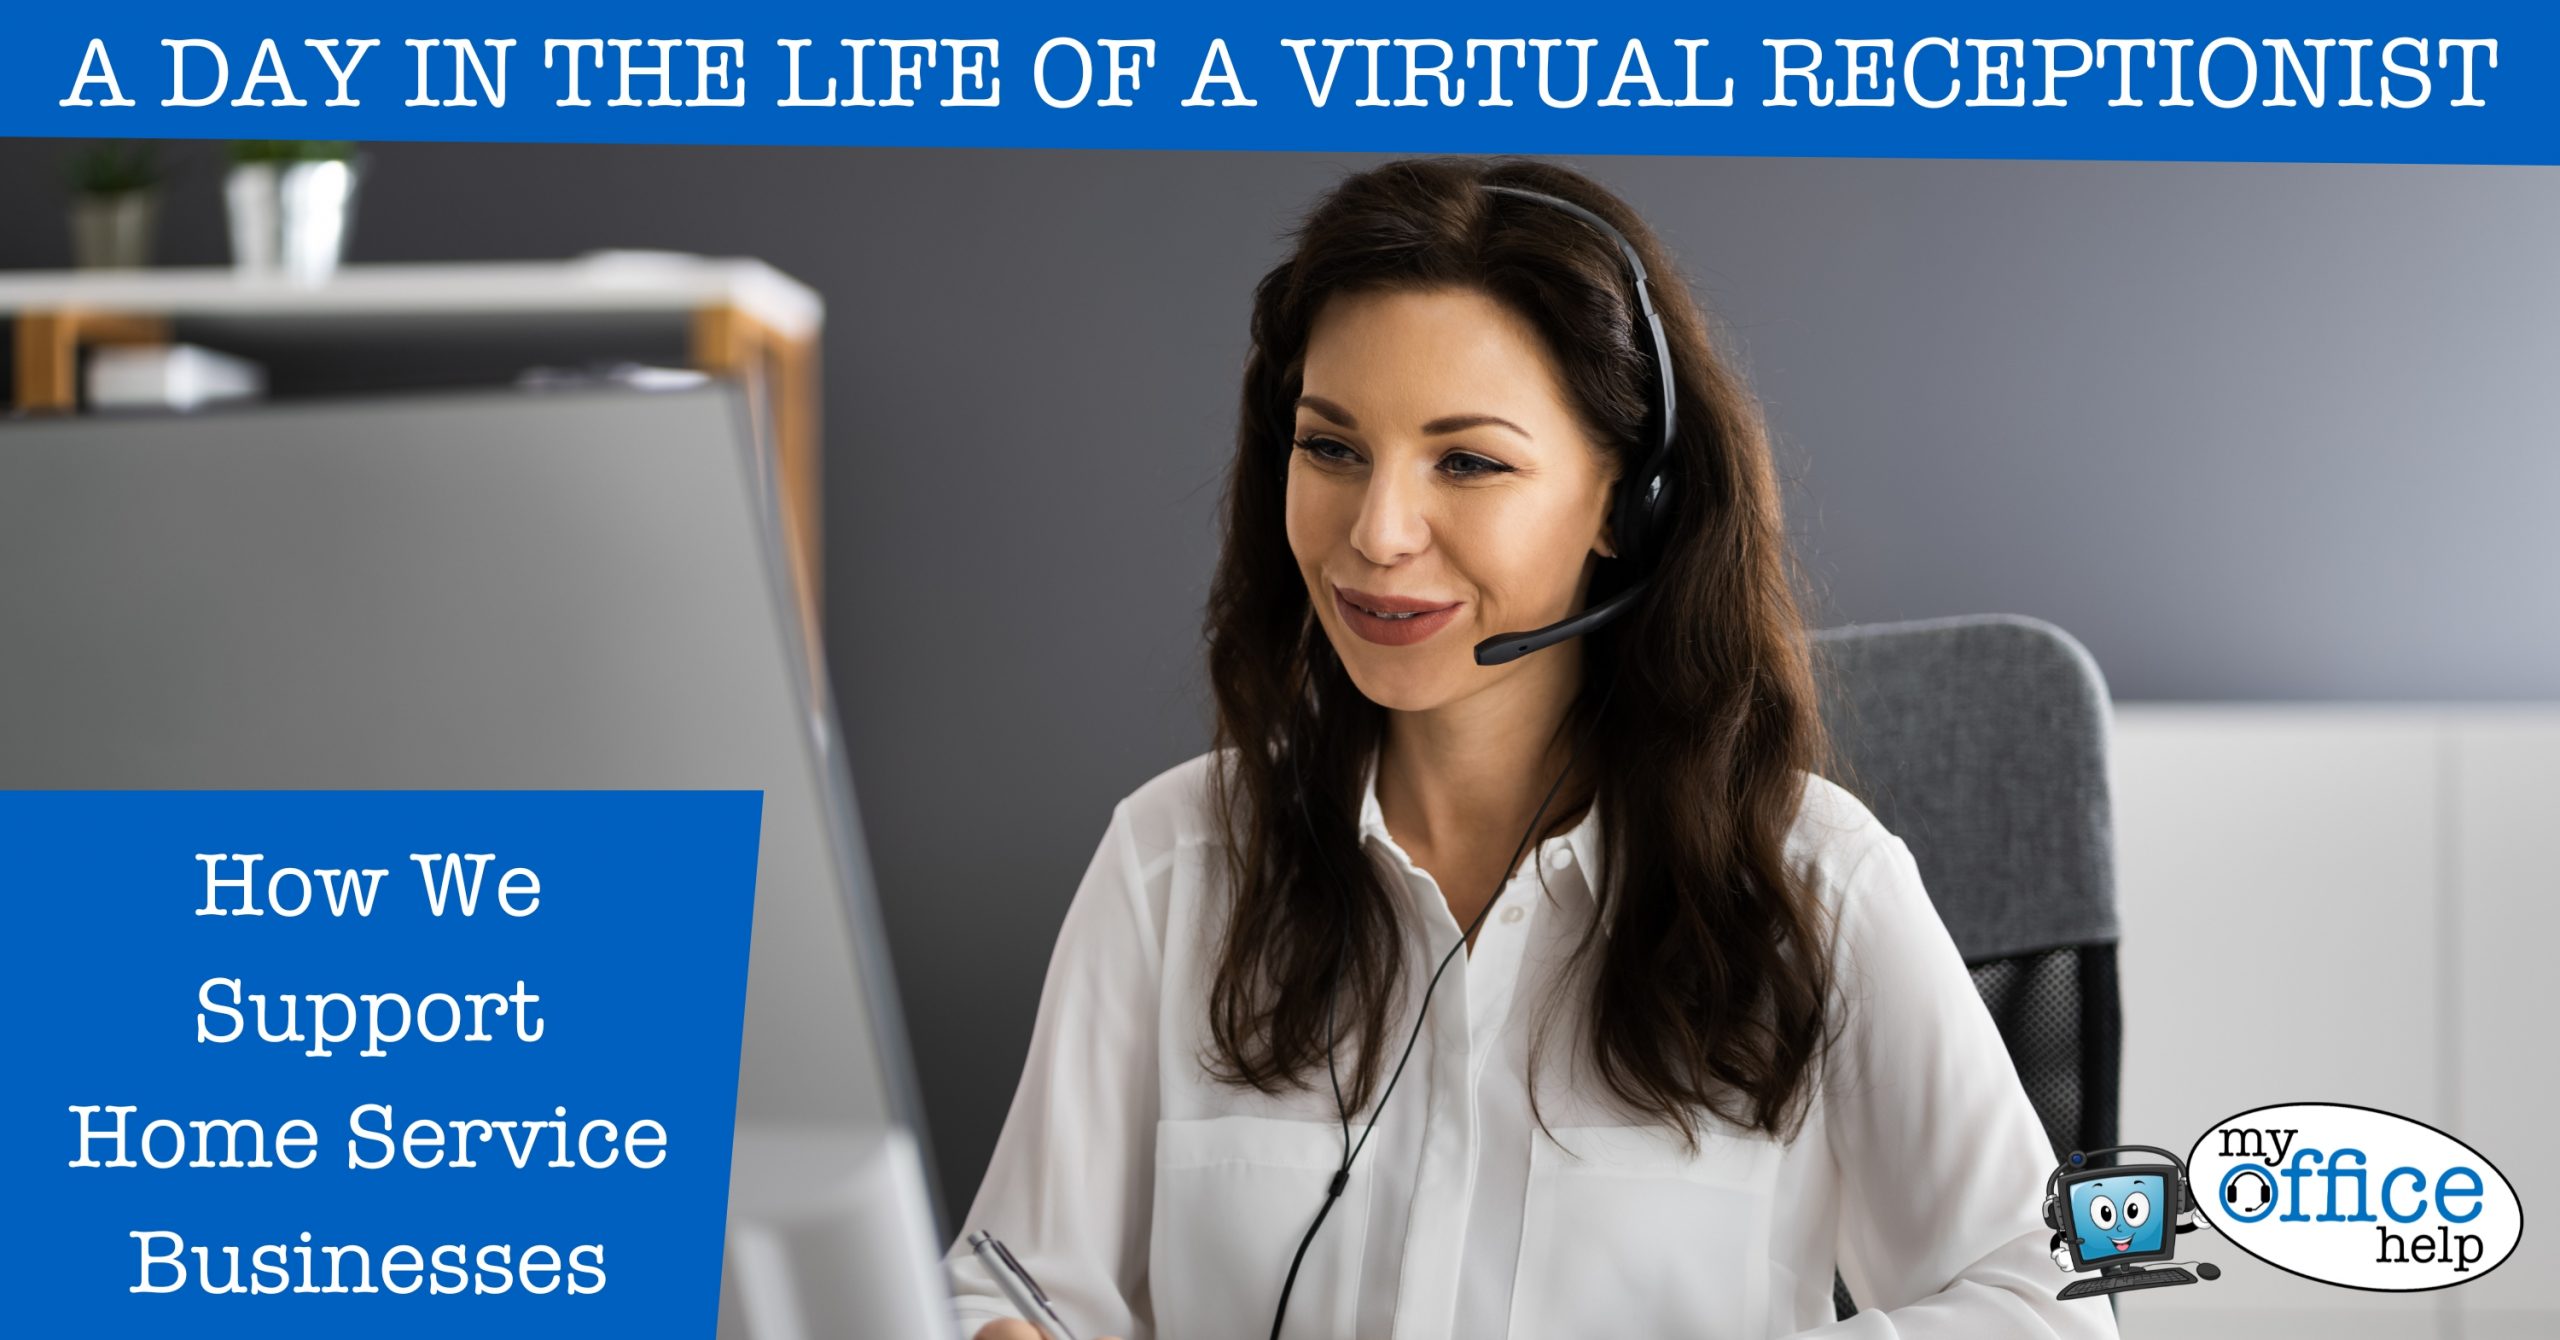 A Day In The Life of A Virtual Receptionist